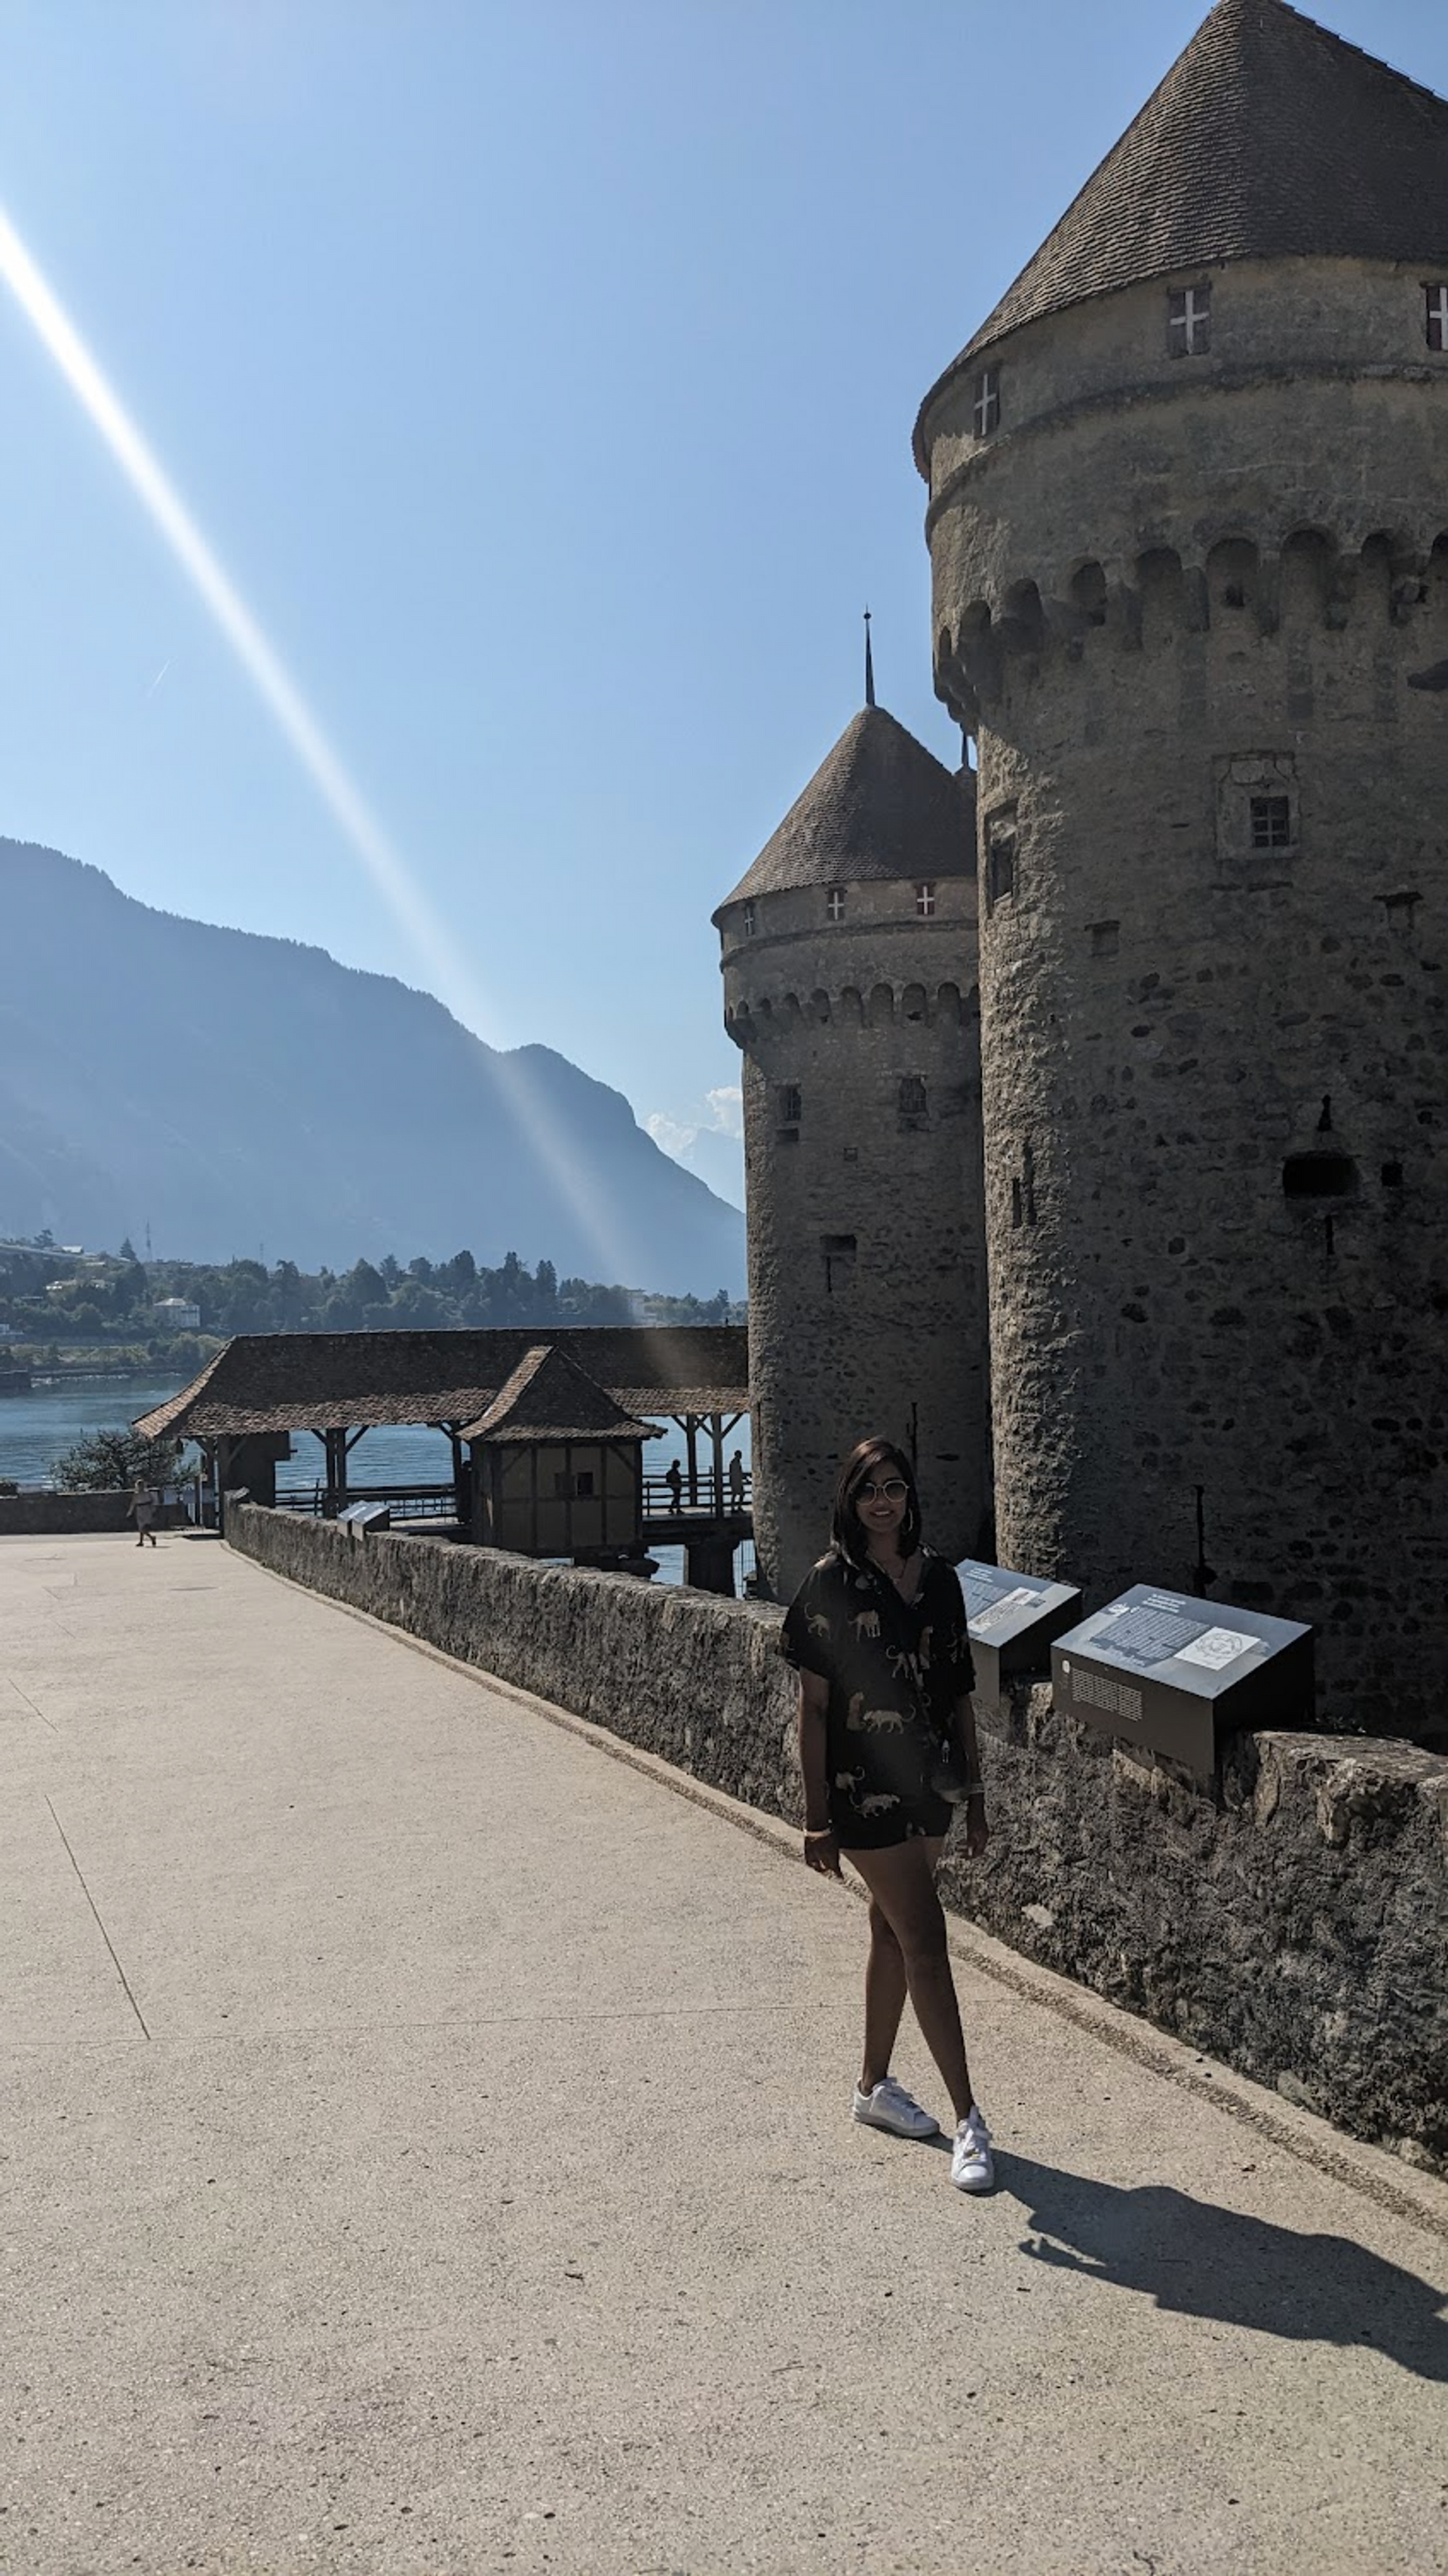 Dana posing in front of the Chateau Chillon entrance